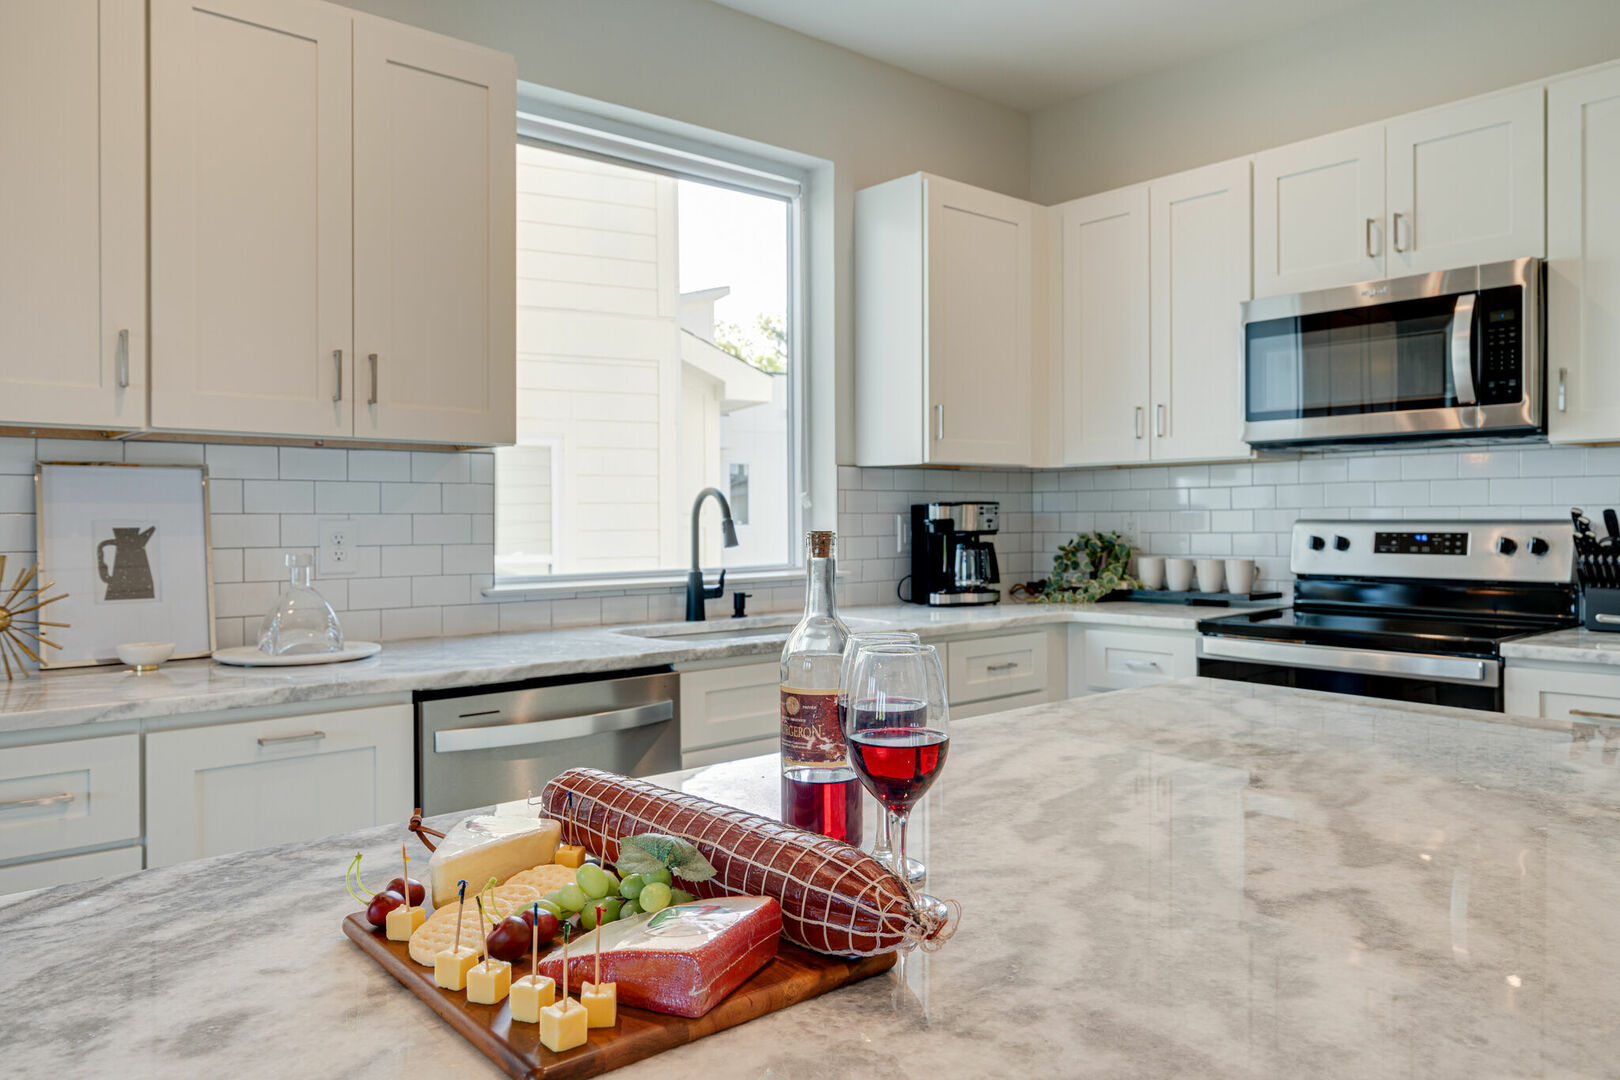 Fully Equipped Kitchen stocked with your basic cooking essentials and stainless-steel appliances. (2nd Floor) -Unit 1-